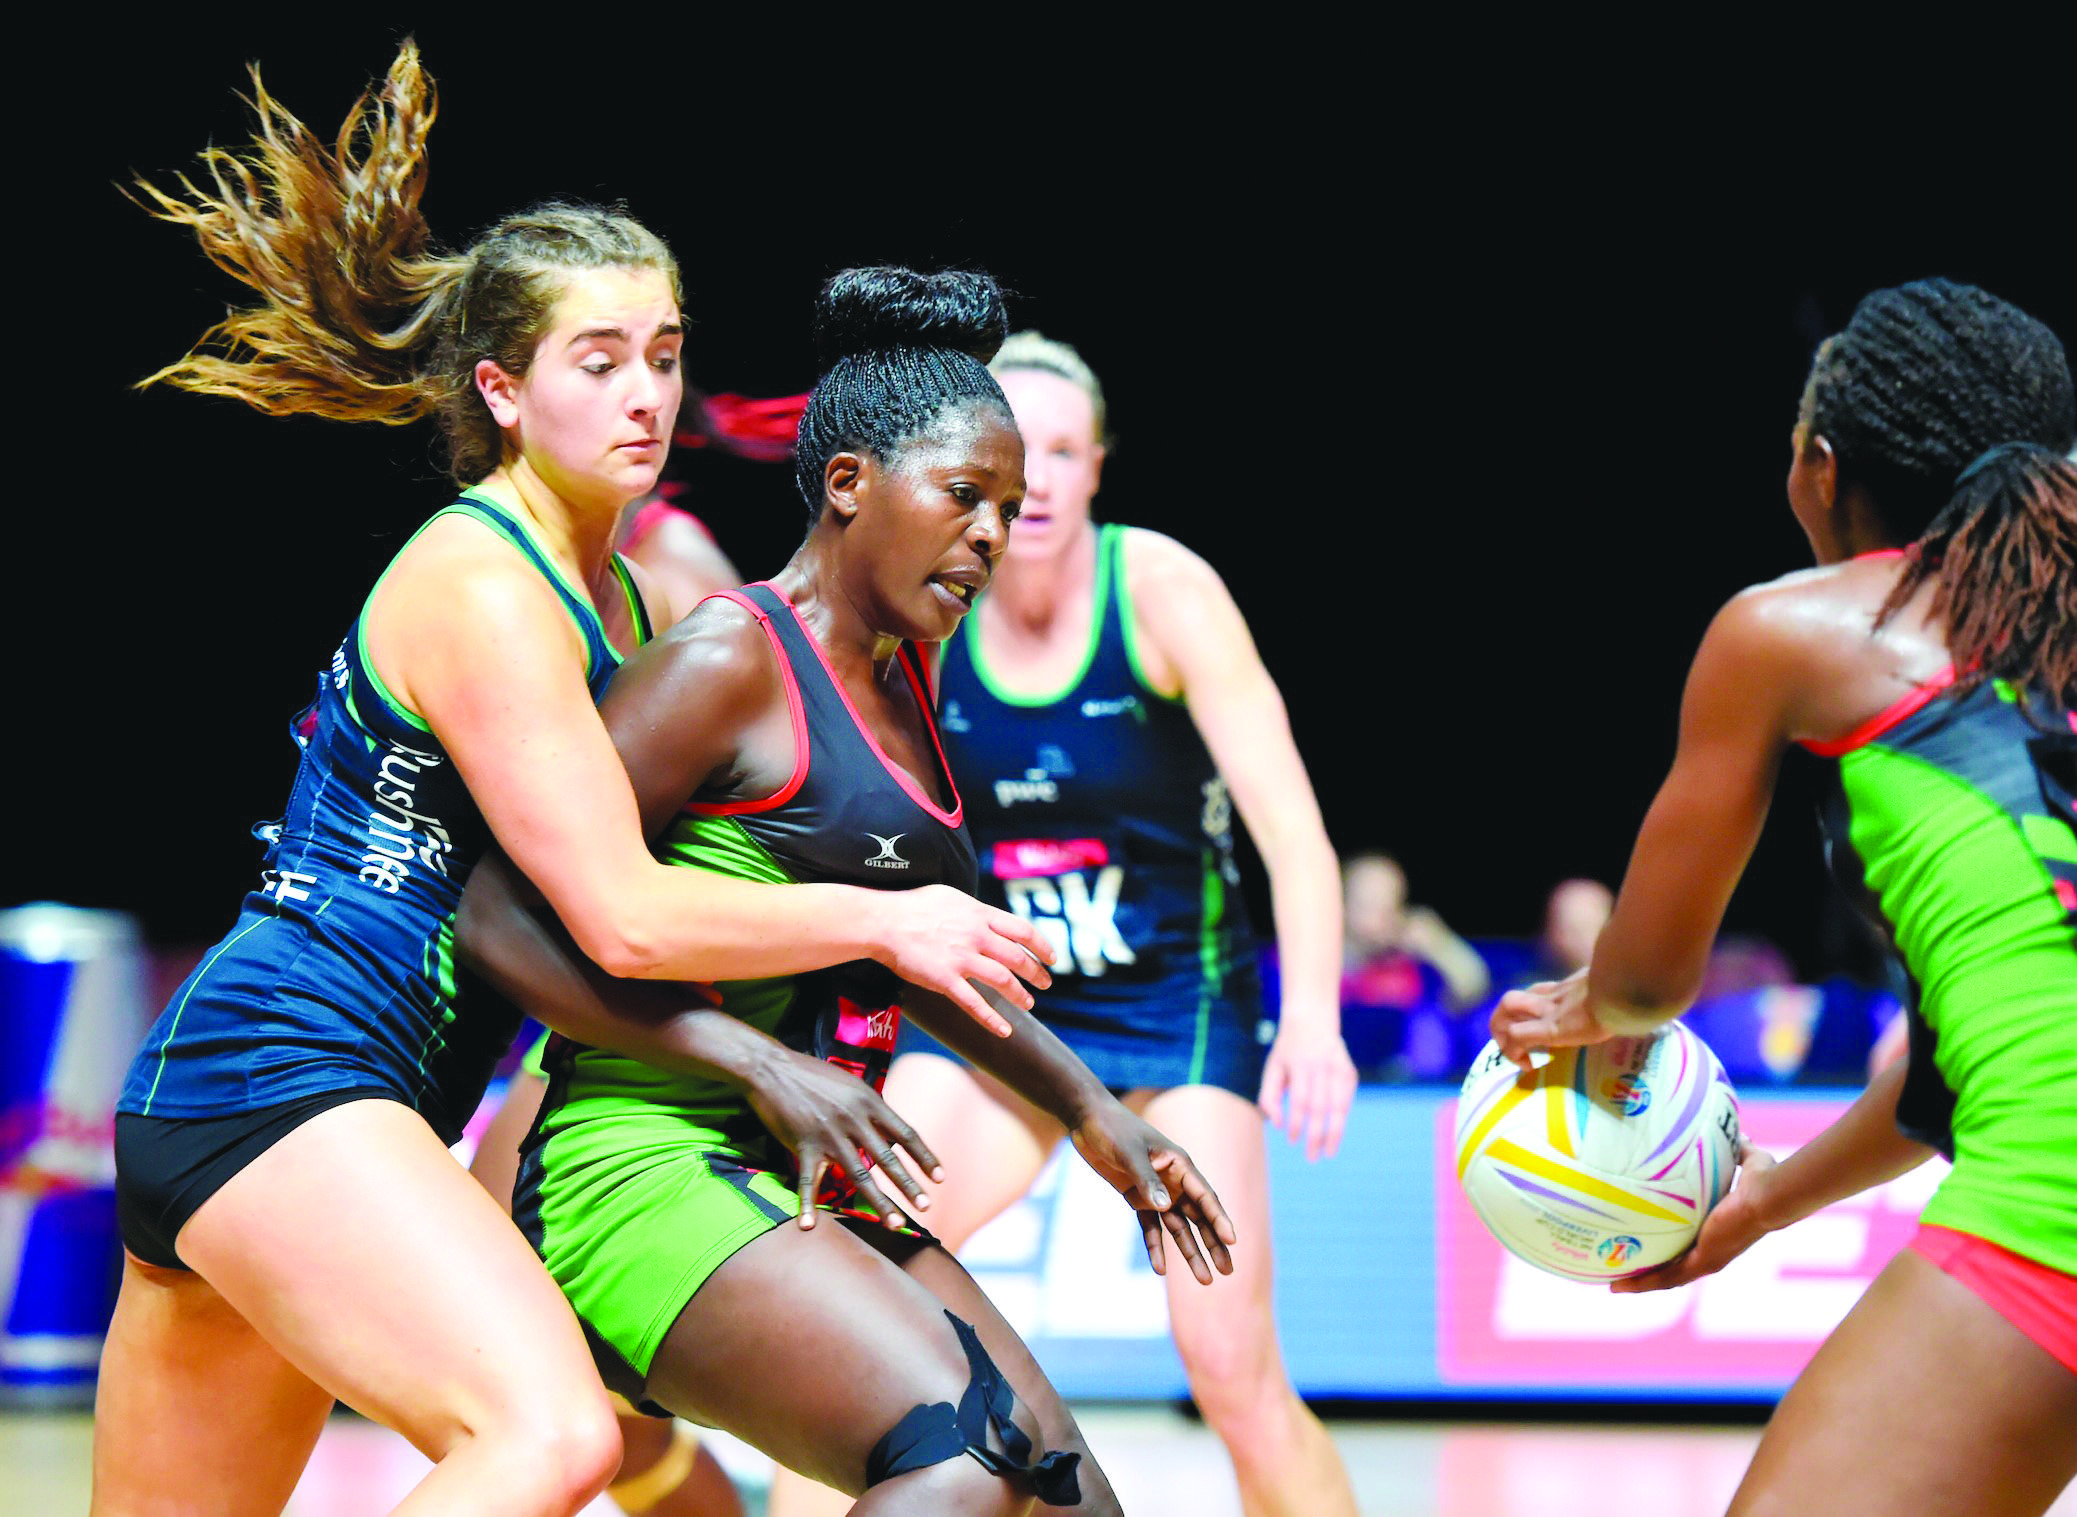 Michelle Magee in action at the 2019 Netball World Cup against Malawi, the NI netball team\'s opponents this Sunday lunchtime